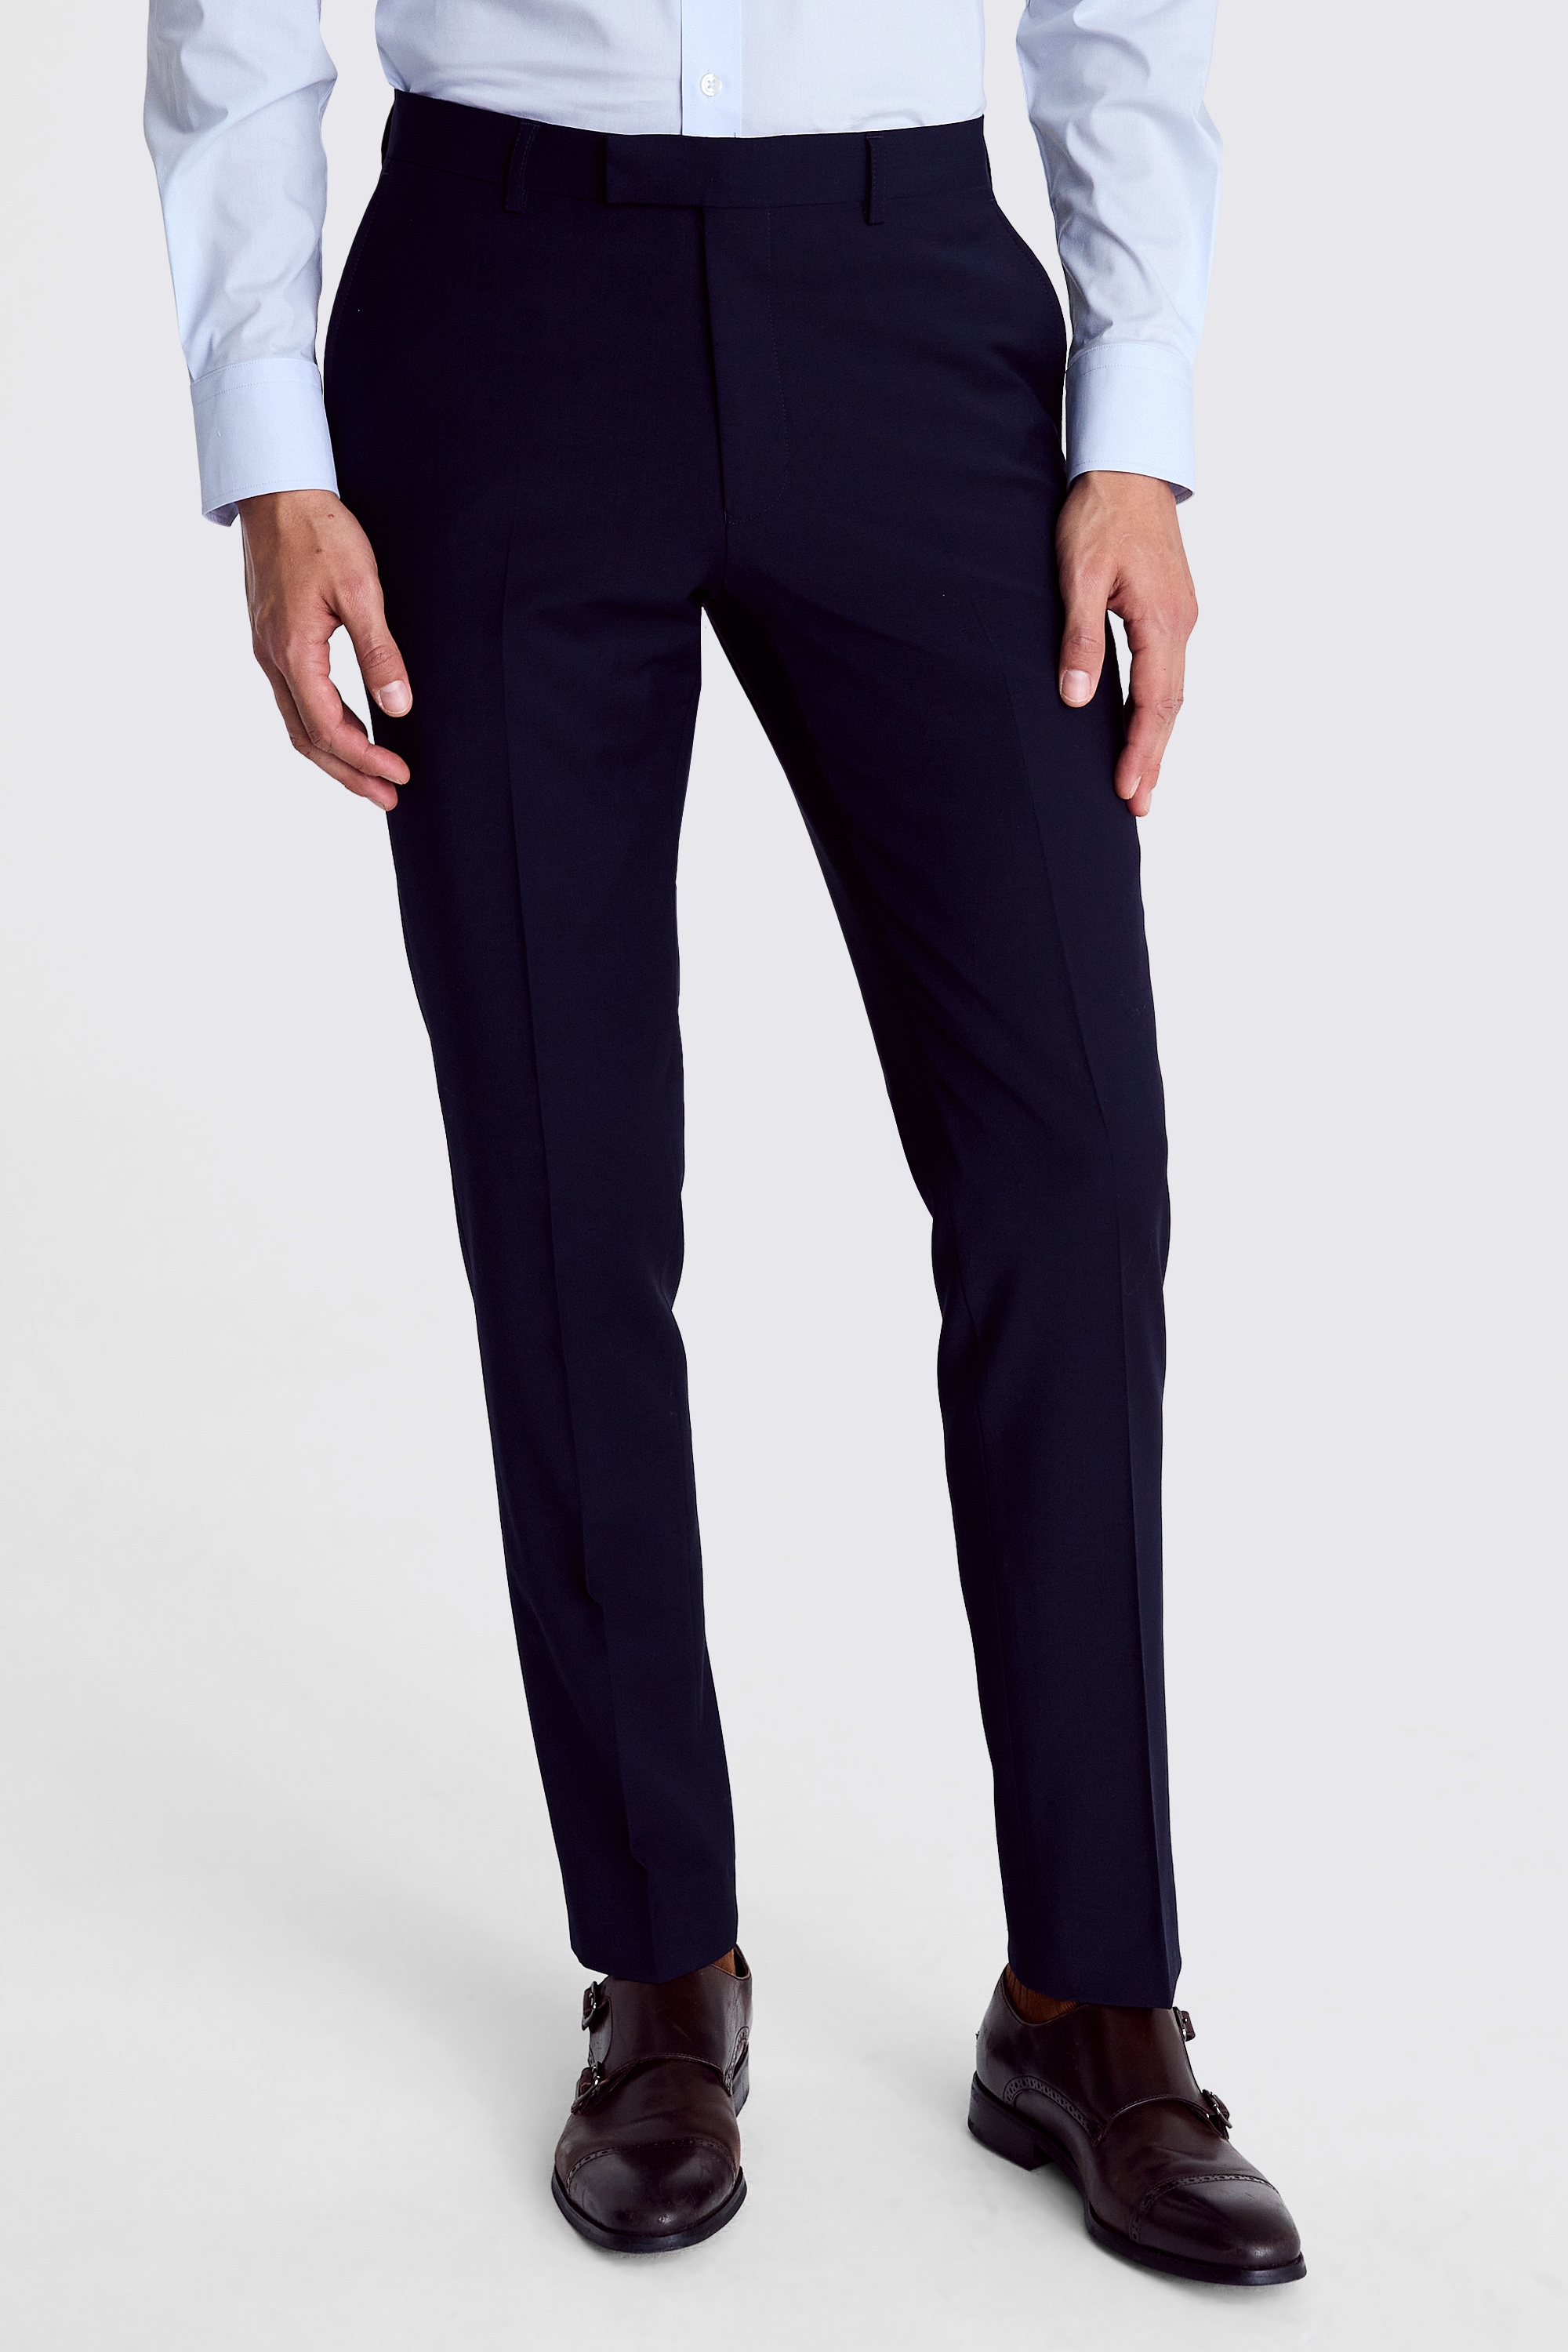 DKNY Slim Fit Ink Performance Trousers | Buy Online at Moss